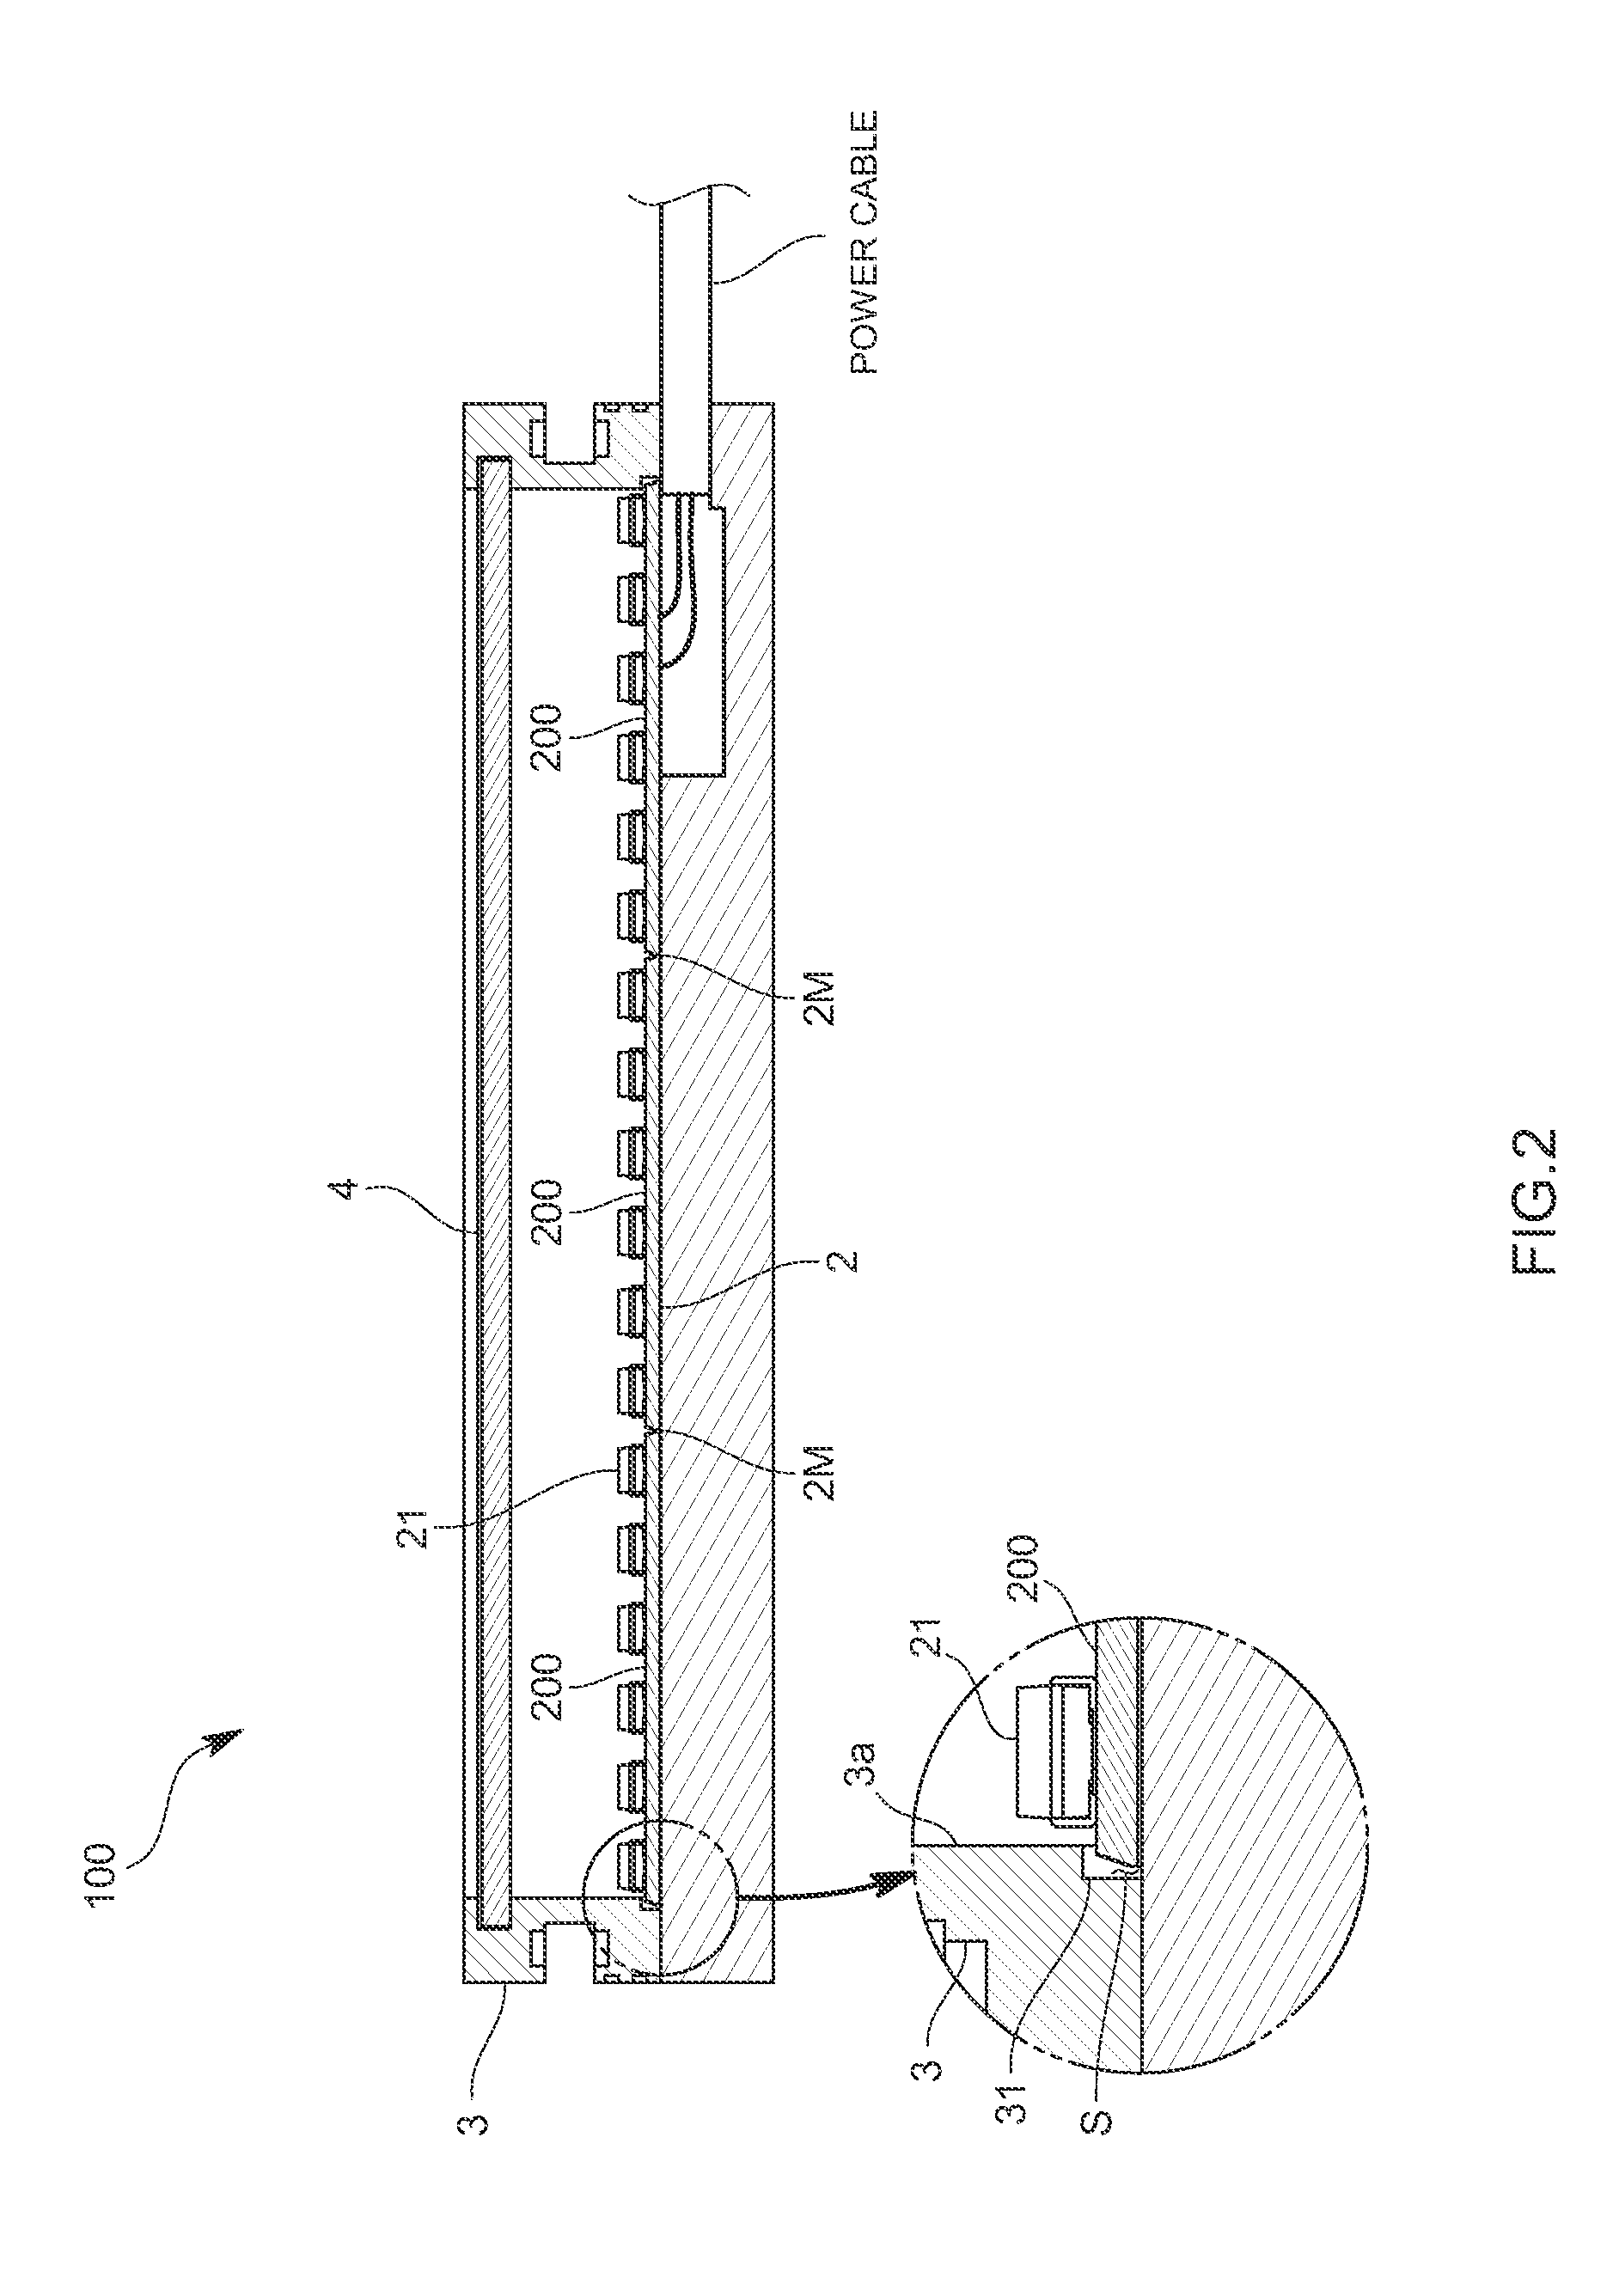 LED wiring board and light irradiation apparatus